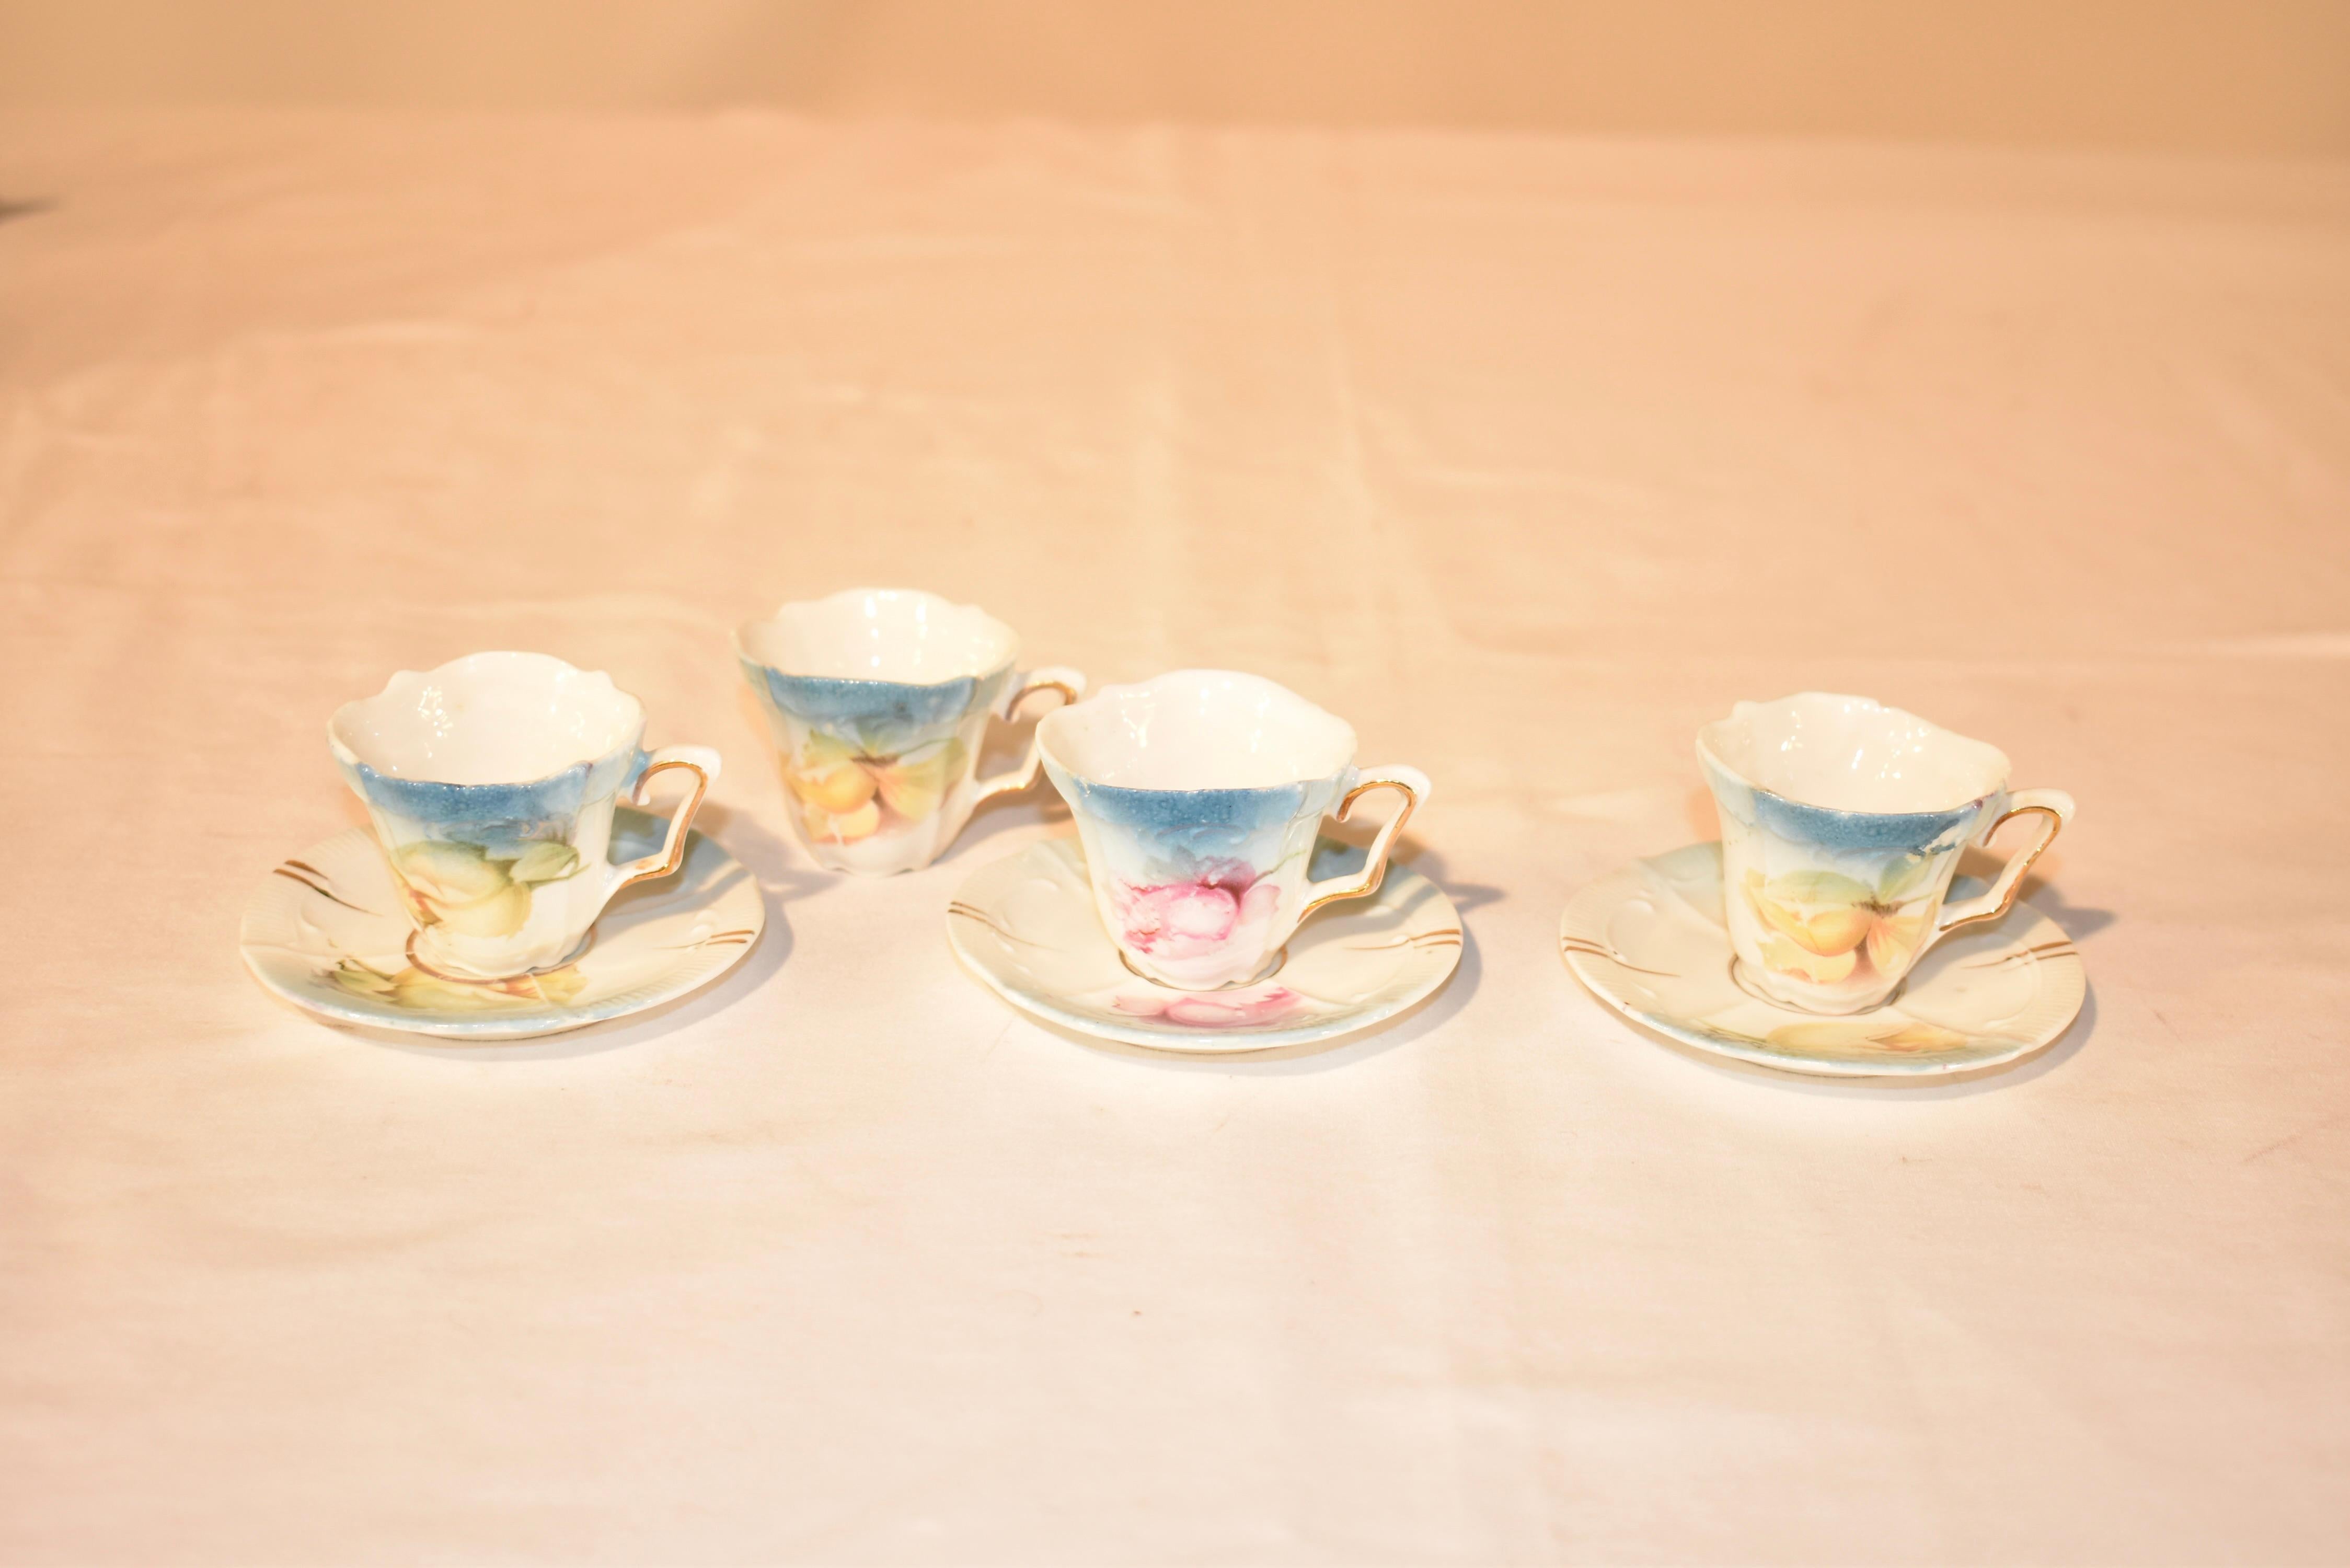 19th century RS Prussia incomplete child's tea set.  The set includes a tray, tea to, sugar and creamer, waste bowl, 4 small cups and 3 saucers and 5 small plates.  The measurements are as follows:  tea pot  5 x 2.5 x 5.5, the cups  2.25 x 1.75 x